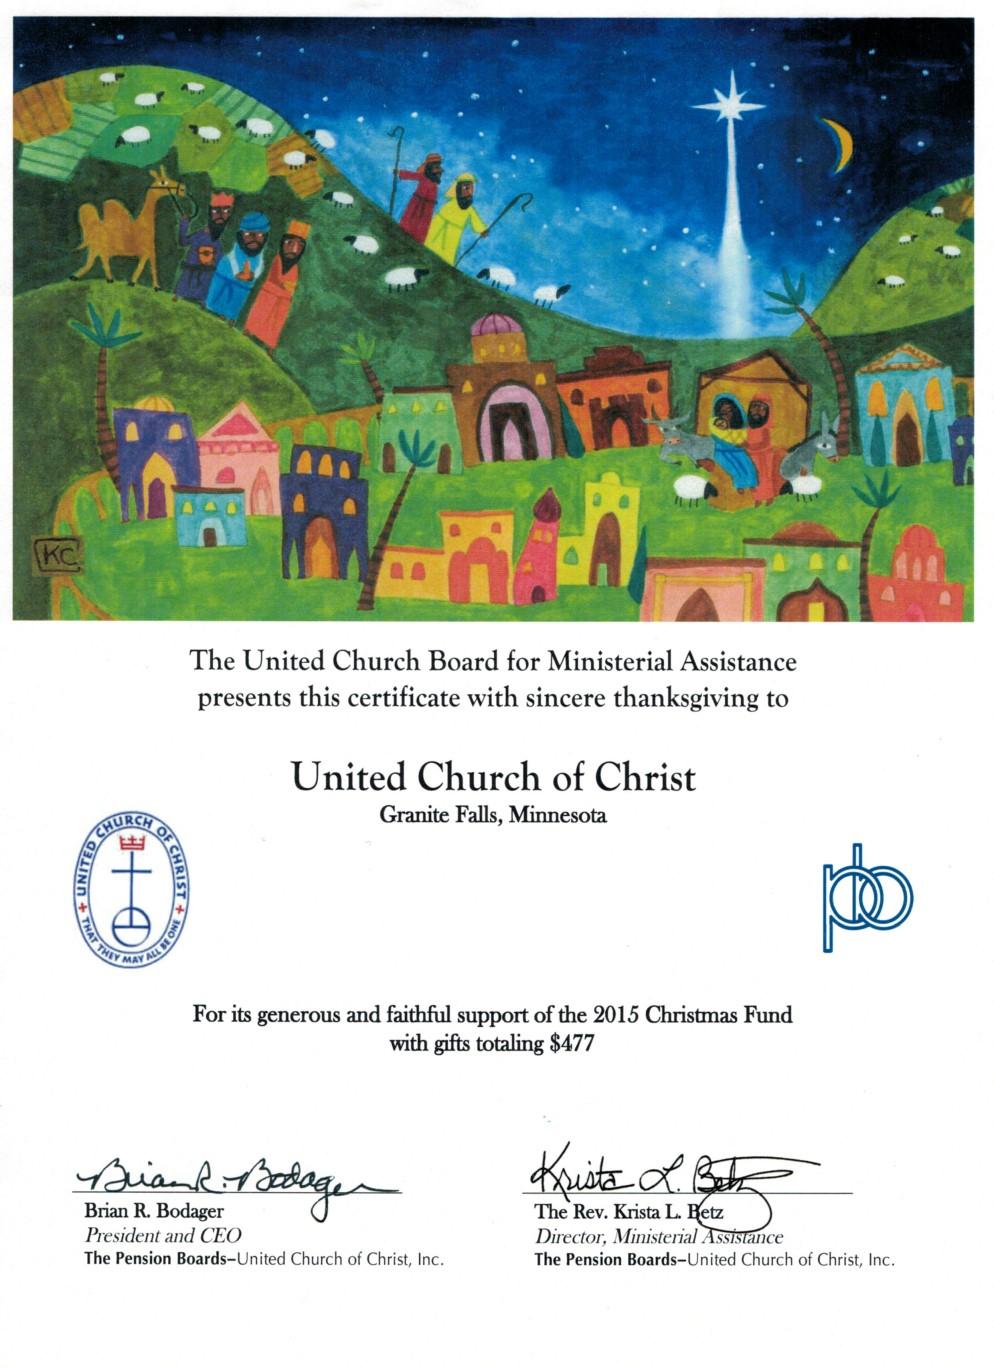 In 2015, UCC congregations and members generously contributed $1,528,481 to the Offering.